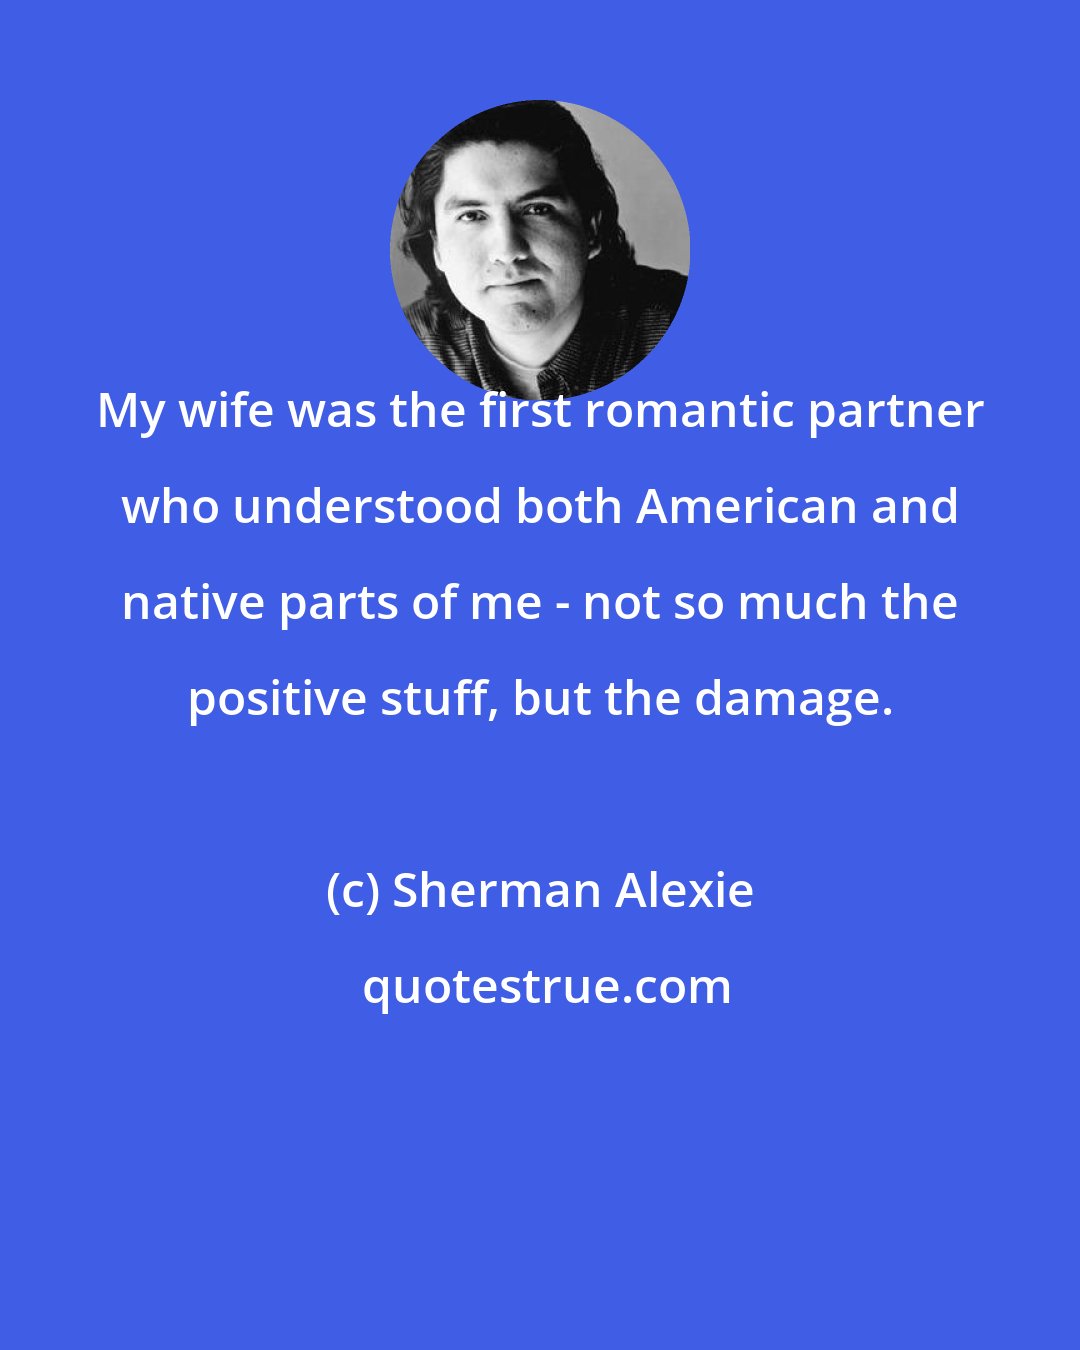 Sherman Alexie: My wife was the first romantic partner who understood both American and native parts of me - not so much the positive stuff, but the damage.